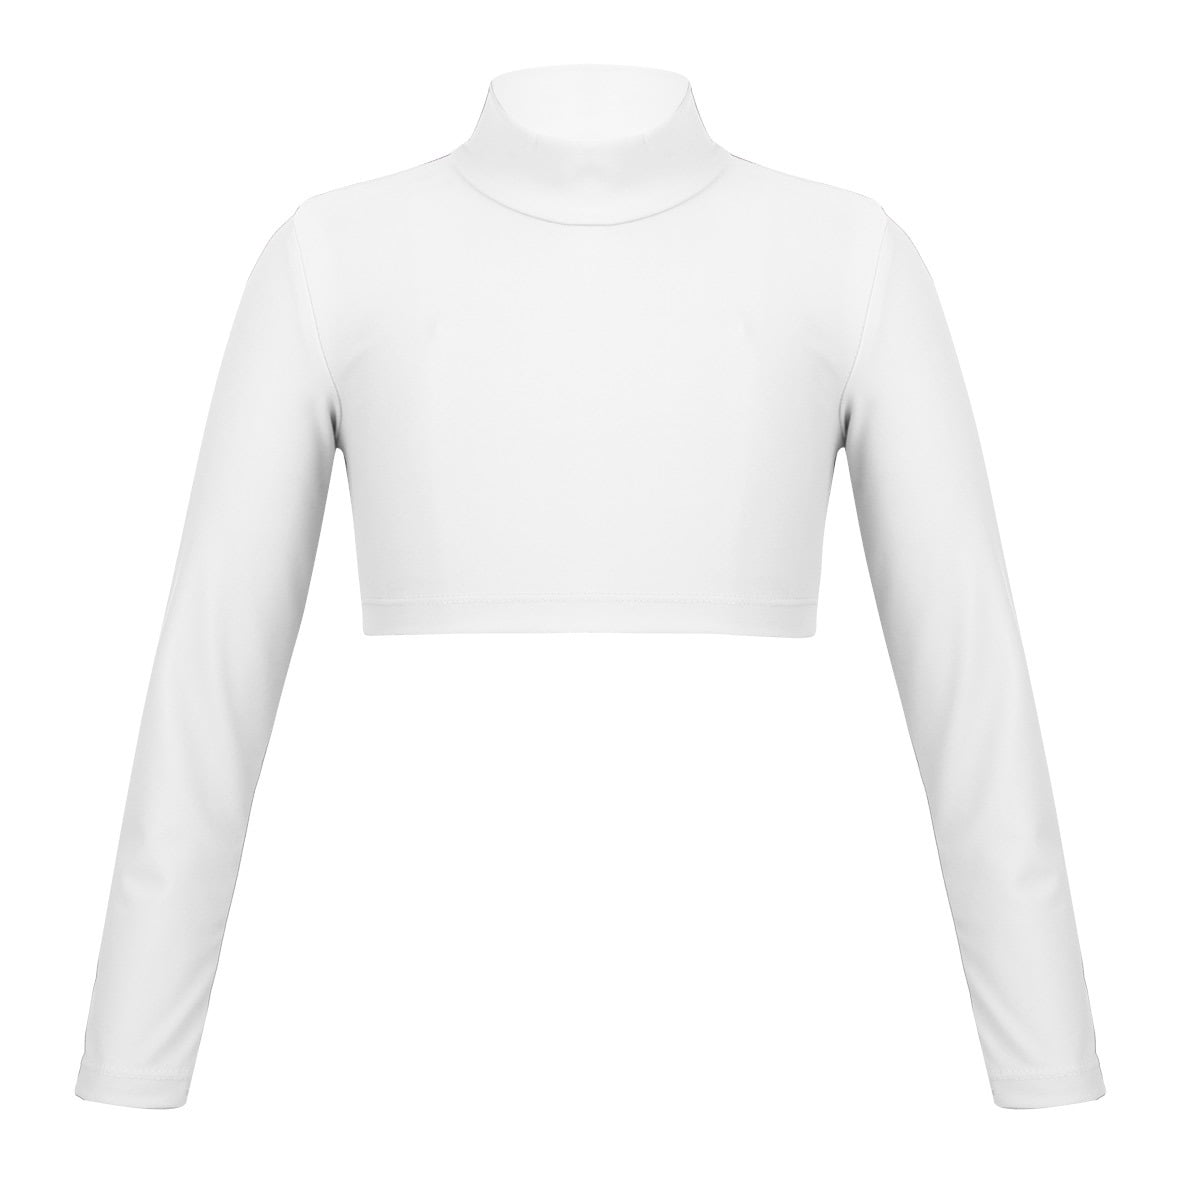 MSemis Girls Long Sleeved High Neck Crop Top Solid Shirt Dance Performing Sports Costume 